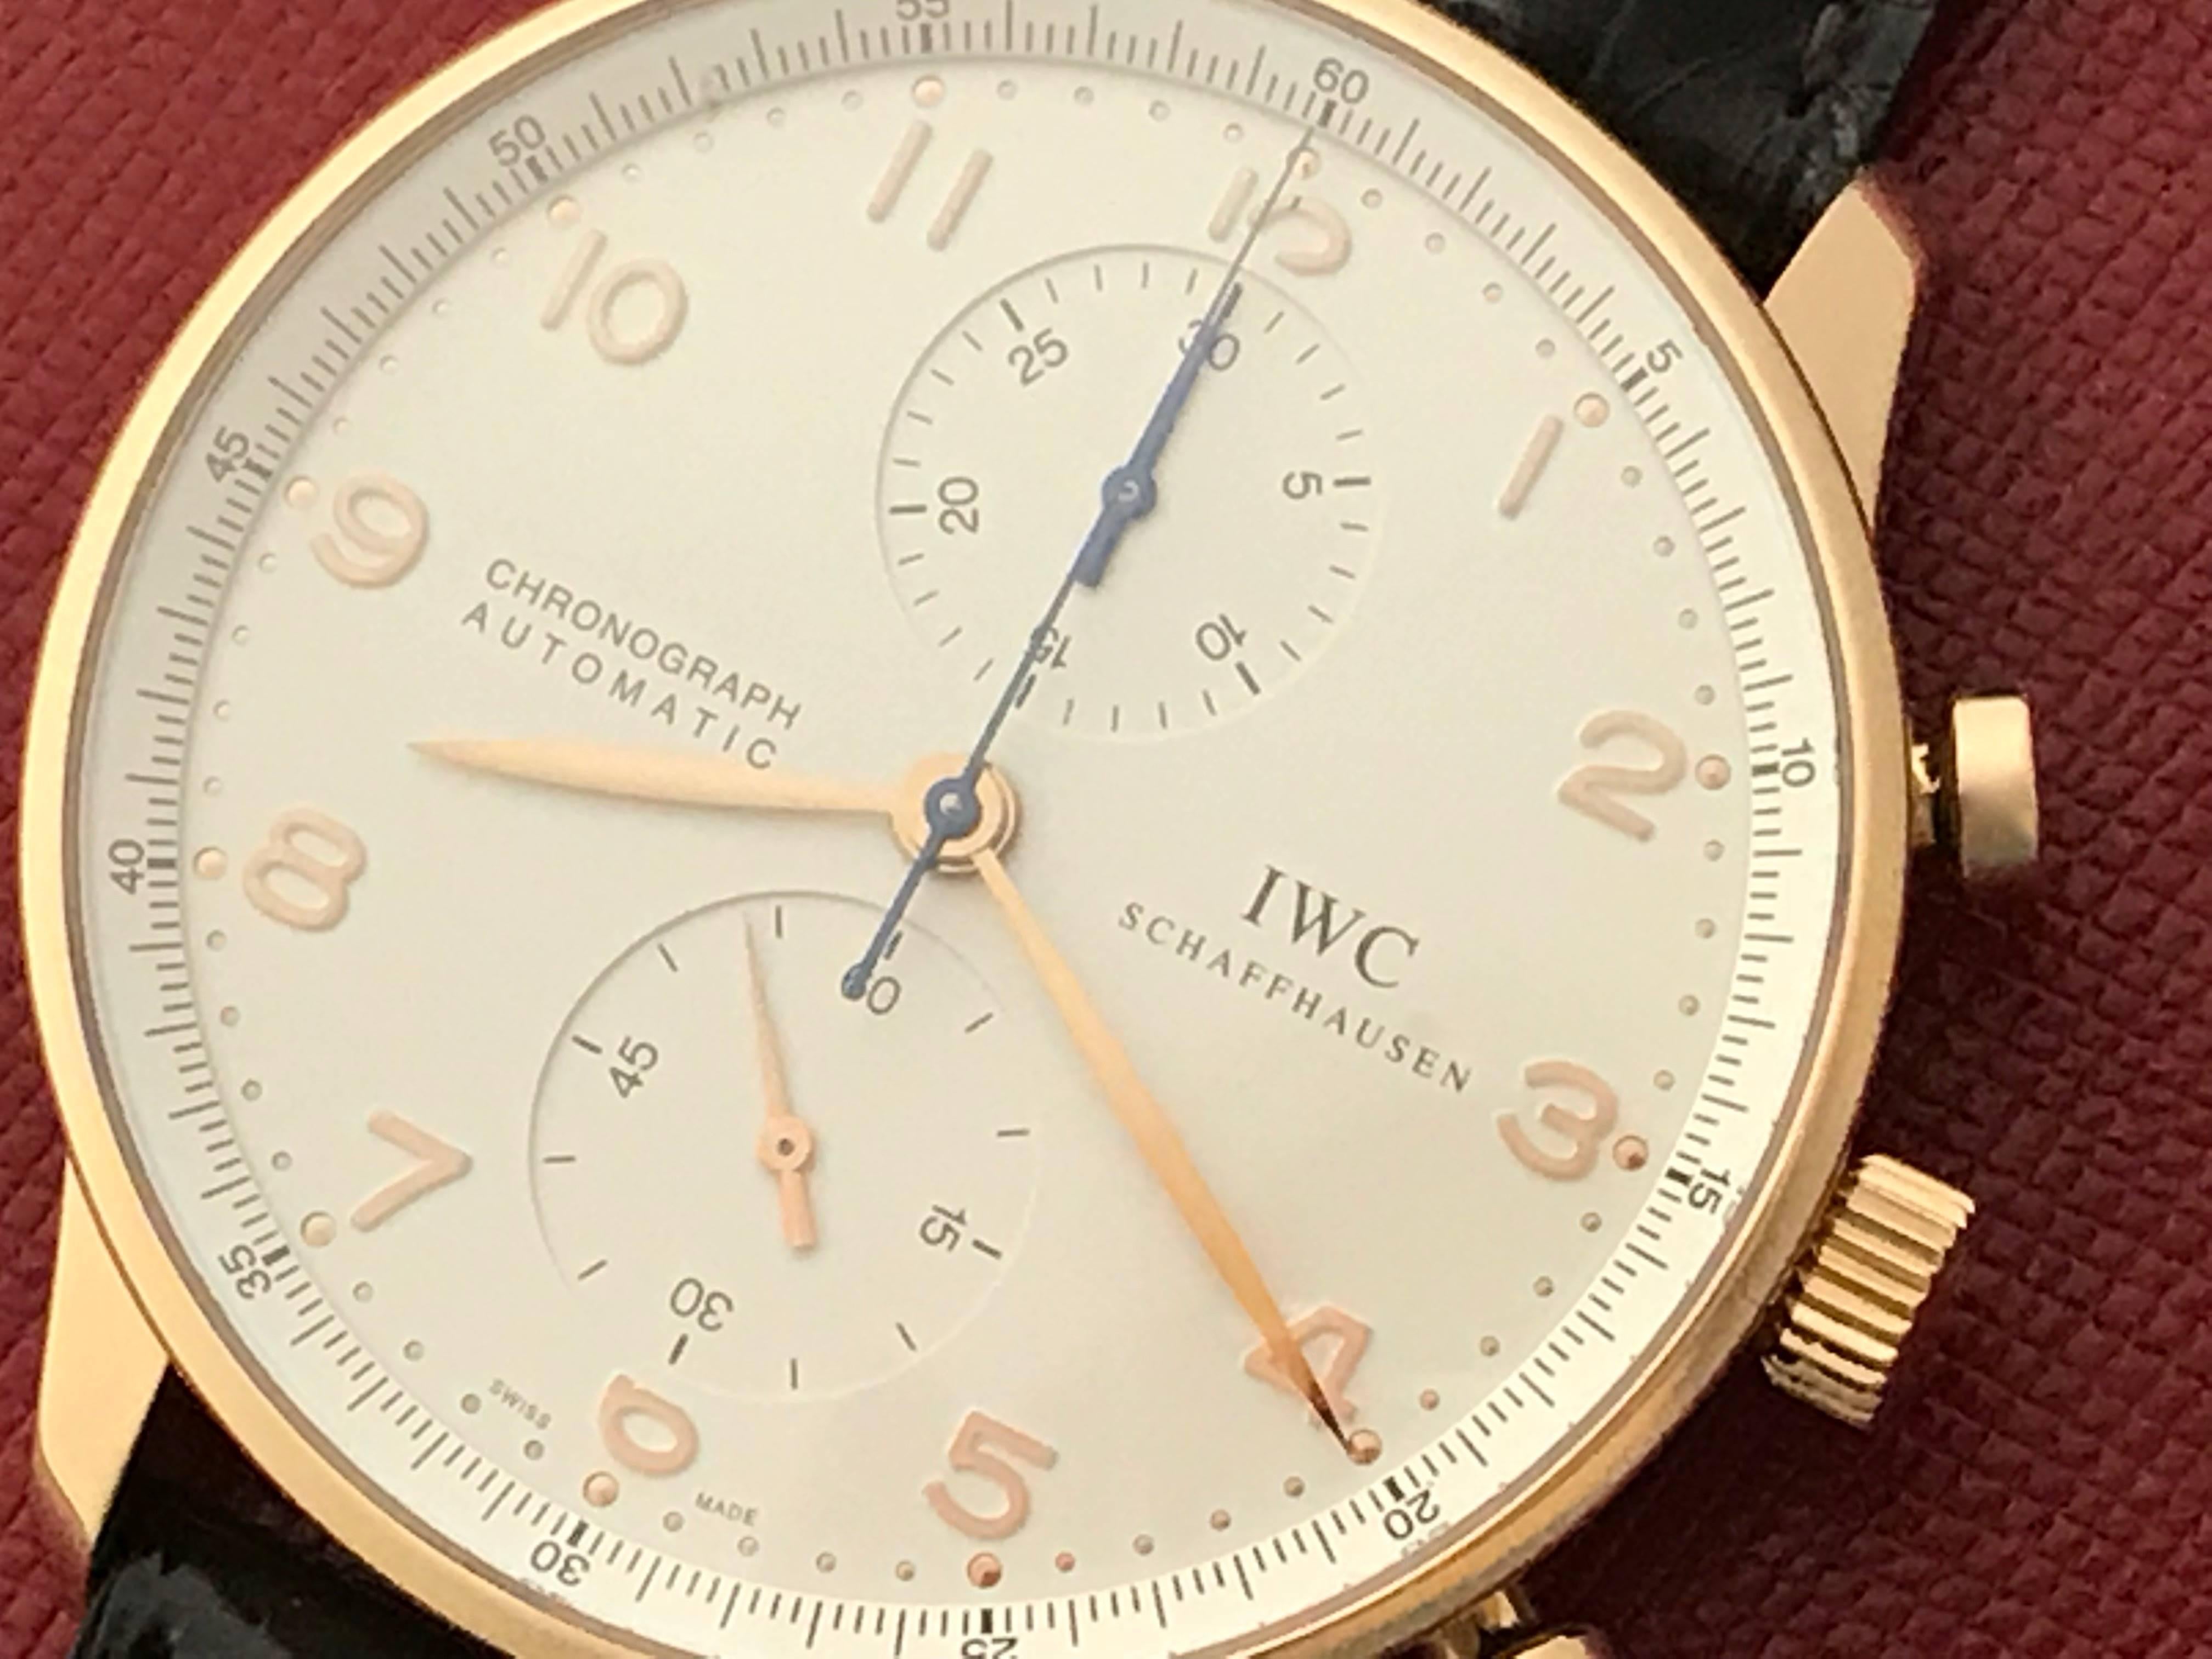 Mens IWC Portuguese Automatic wrist watch. Model 3714-002. Certified pre-owned and ready to ship. Silvered Dial with rose gold Arabic numerals, and 18k rose gold round case with exposition back to view movement. (42mm). Dark brown Alligator strap